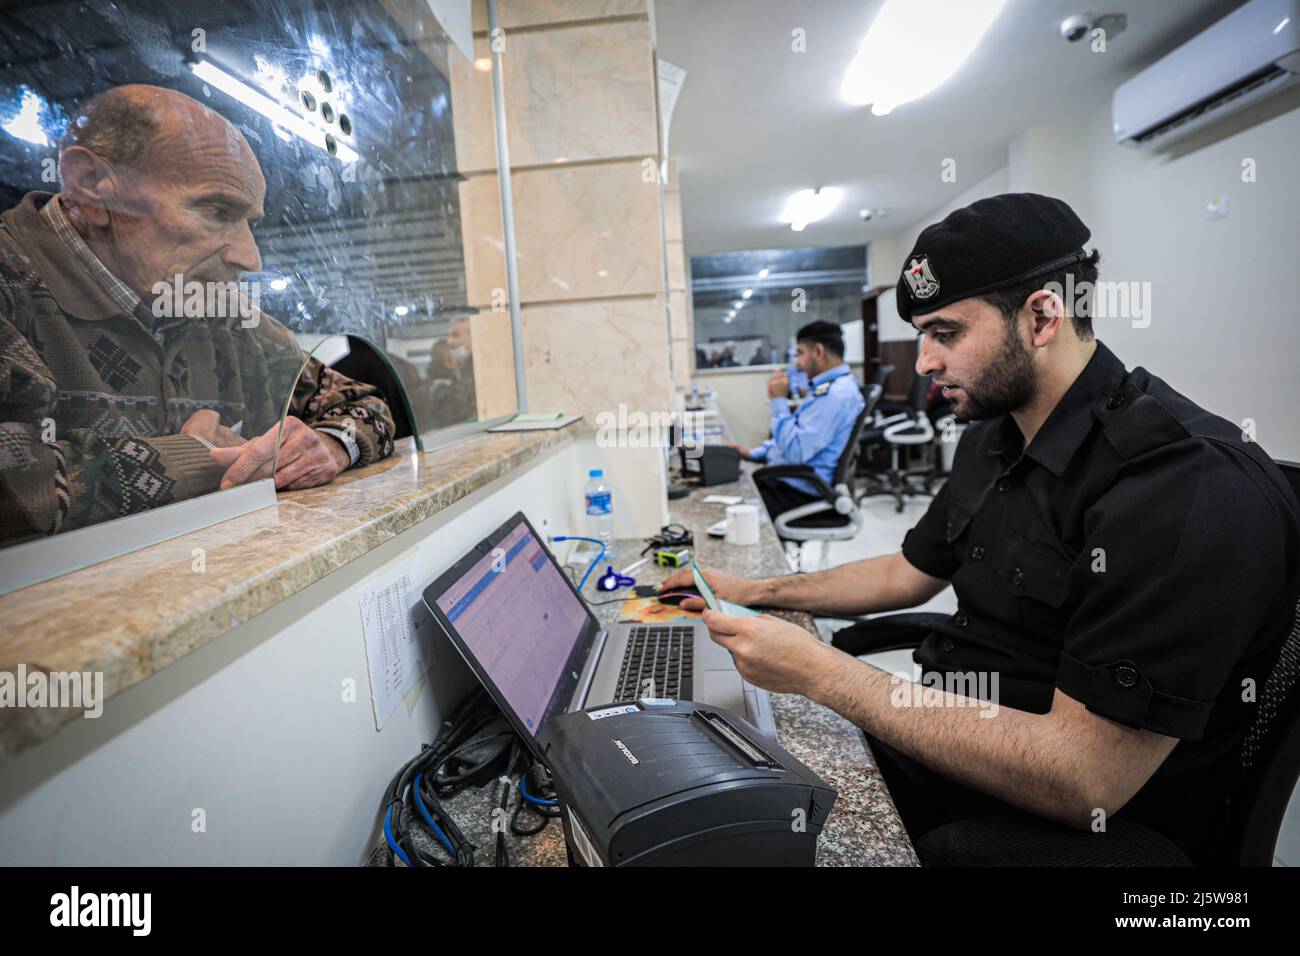 Beit Hanoun, Palestine. 25th Apr, 2022. Palestinian officers verify the identity of workers leaving Beit Hanun in the northern Gaza Strip through the Erez crossing. Credit: SOPA Images Limited/Alamy Live News Stock Photo